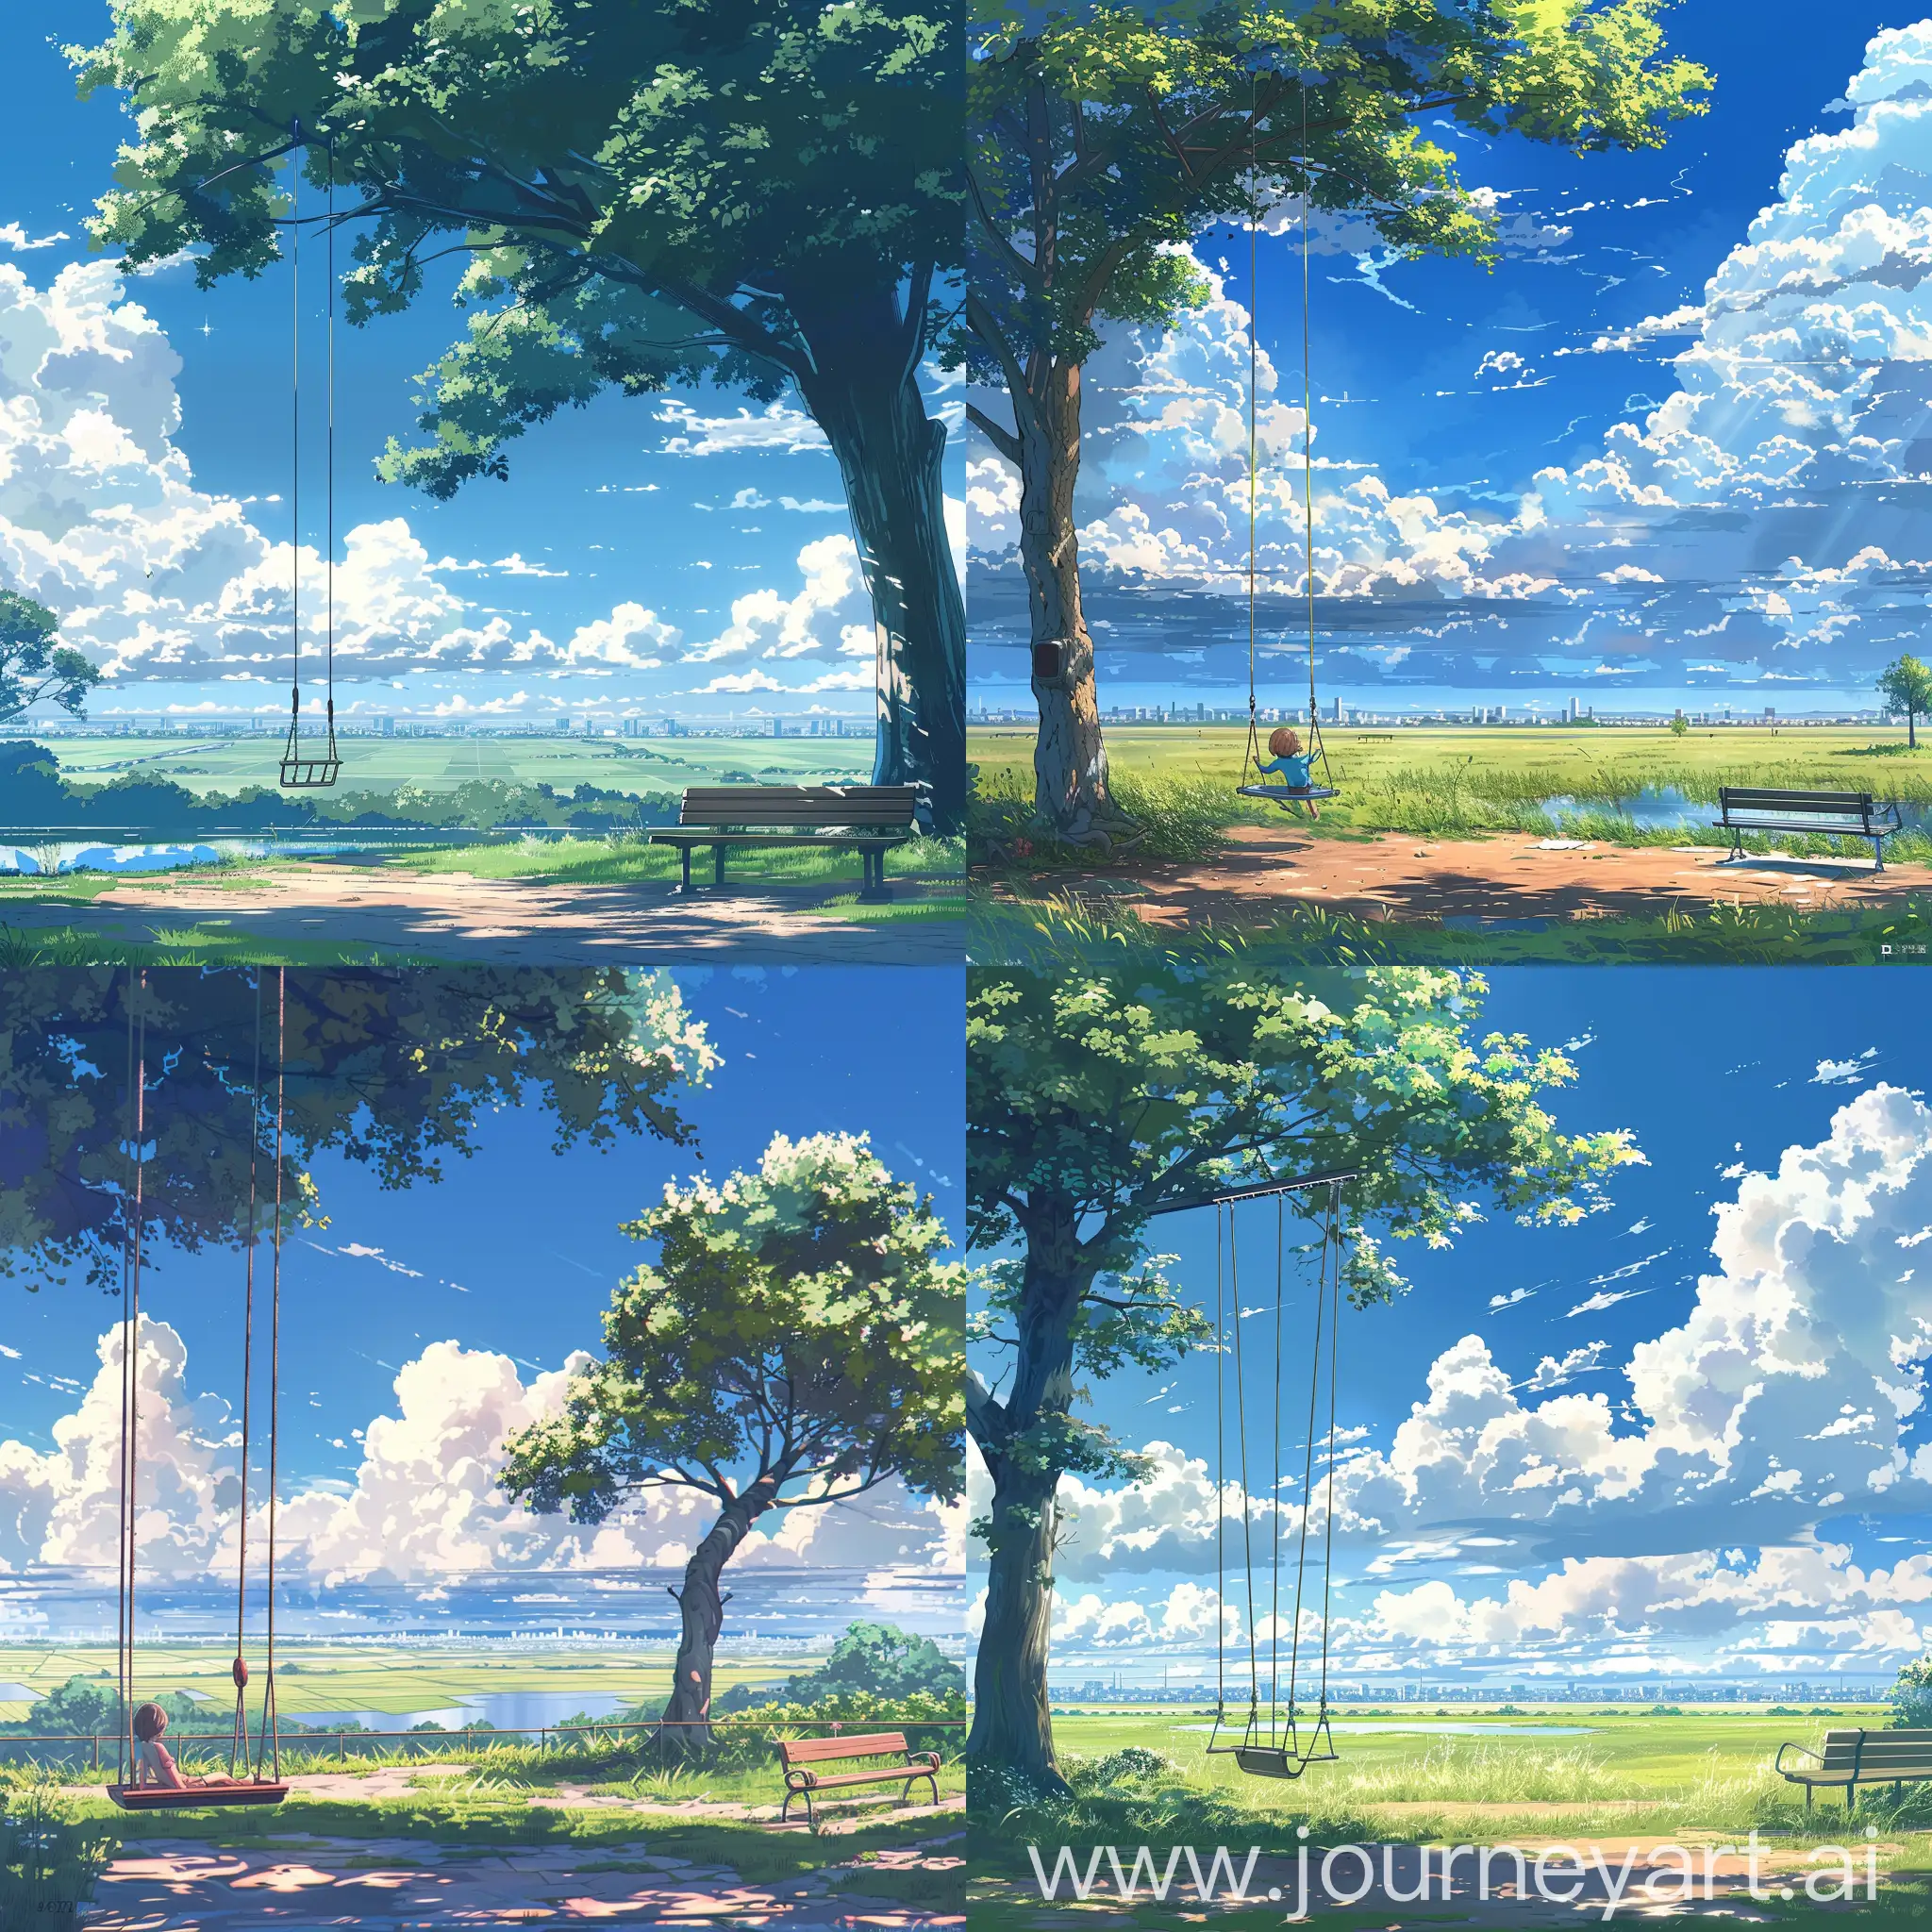 AnimeStyle-Nostalgic-Summer-Park-Scene-with-Swing-and-City-View